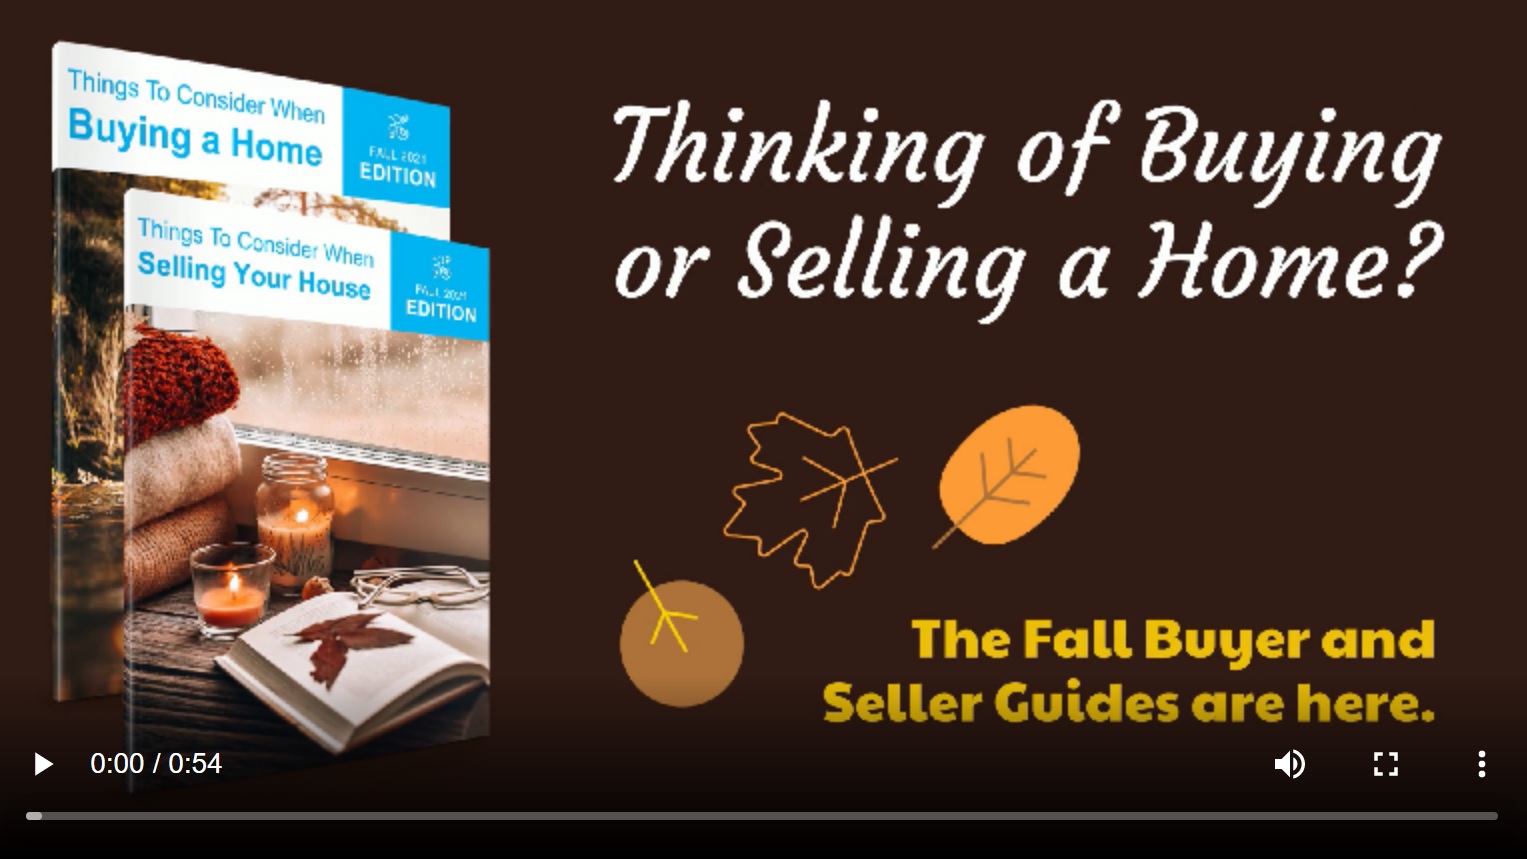 Fall 2021 Home Buyer and Seller Guides